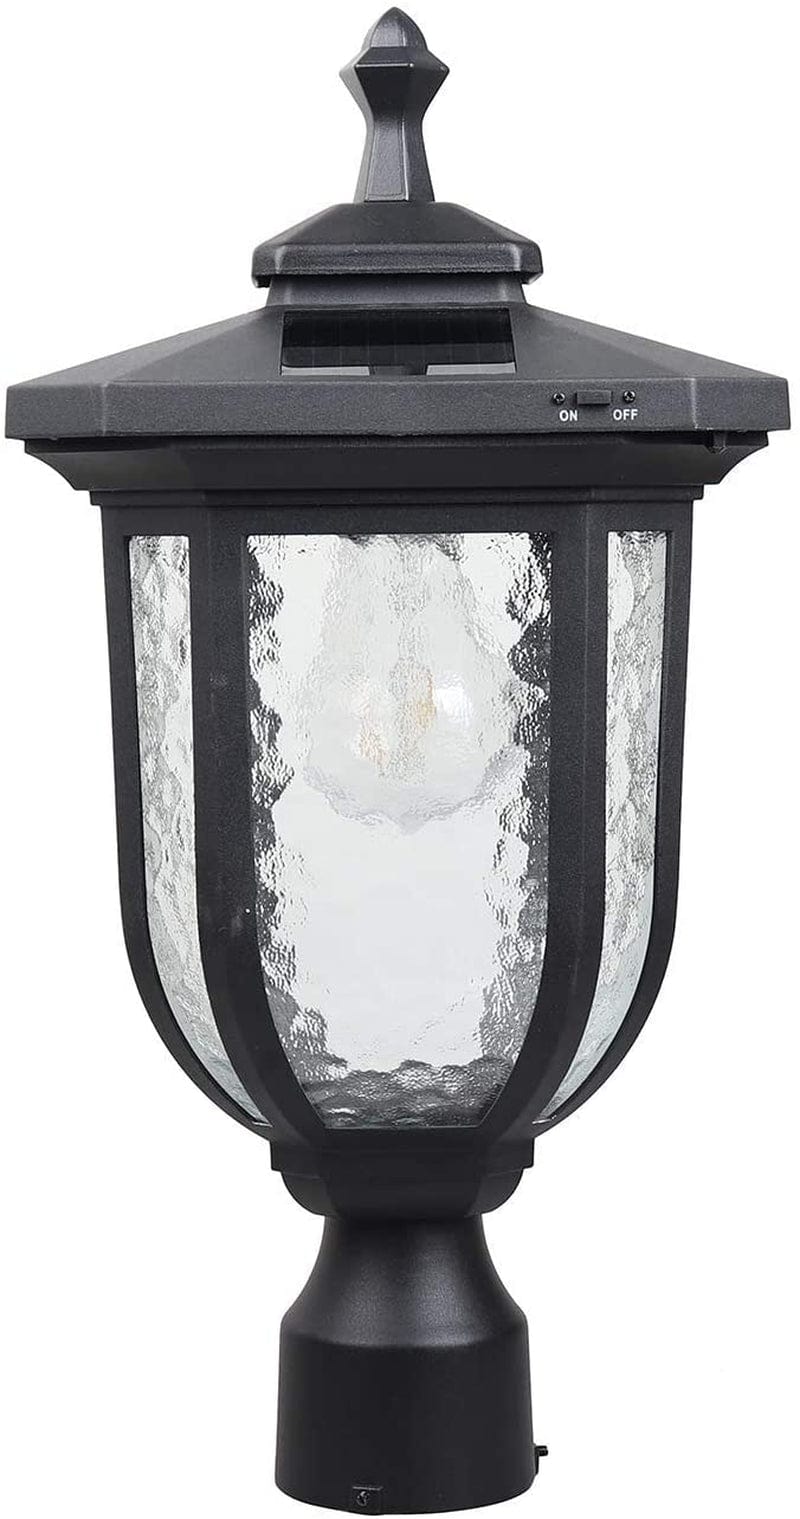 KMC Lighting ST4322Q-A Solar Post Light Solar Powered Lamp Post Light Post Solar Light Outdoor Fabulously Bright 120 LUMENS Made of Aluminum Die-Casting and Glass with 3 Inches Post Adaptor